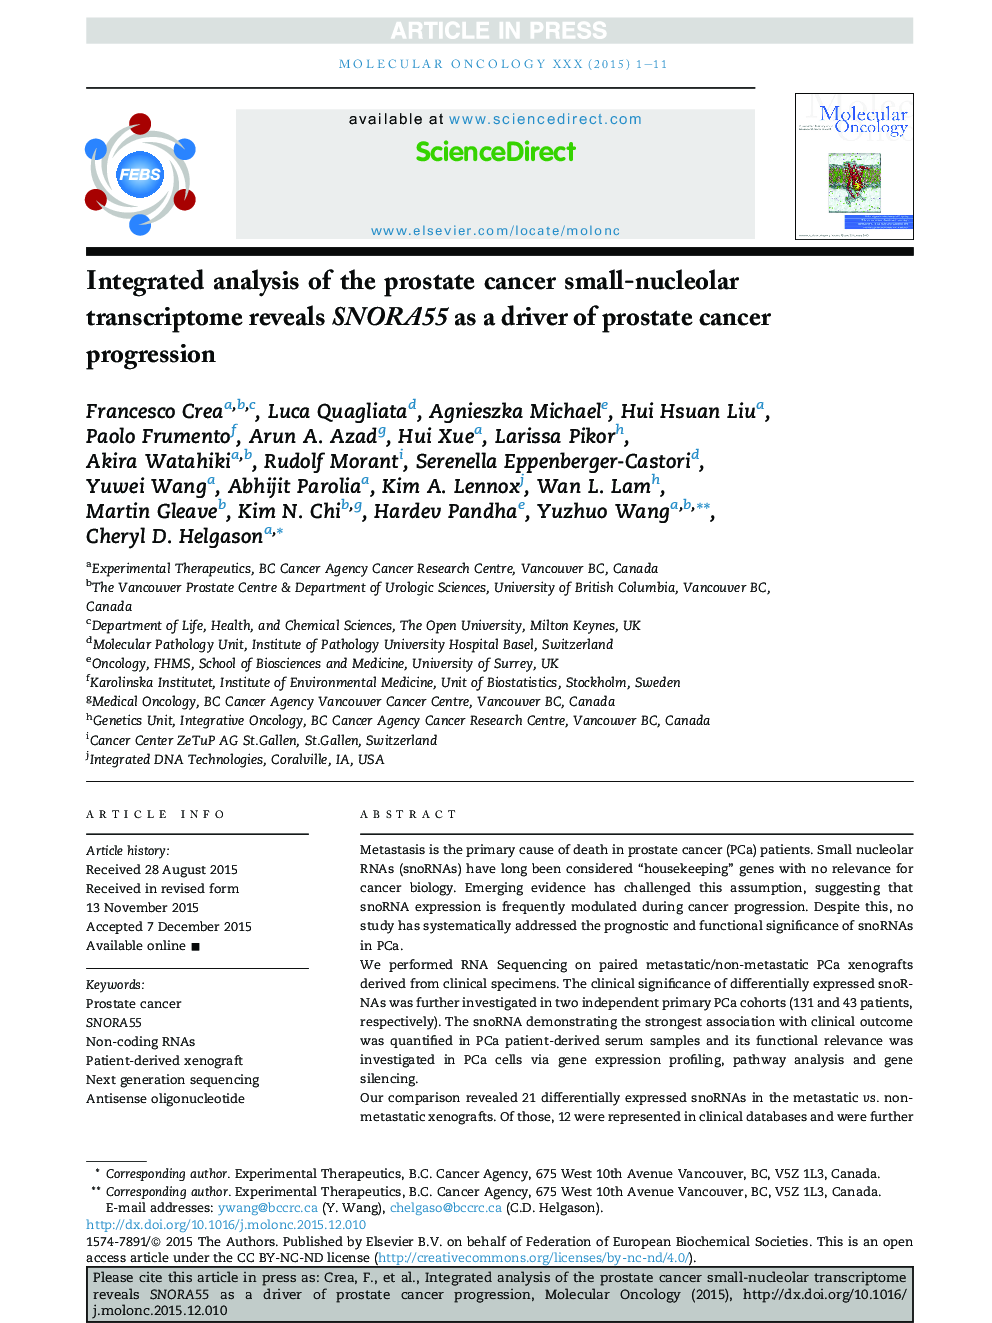 Integrated analysis of the prostate cancer small-nucleolar transcriptome reveals SNORA55 as a driver of prostate cancer progression